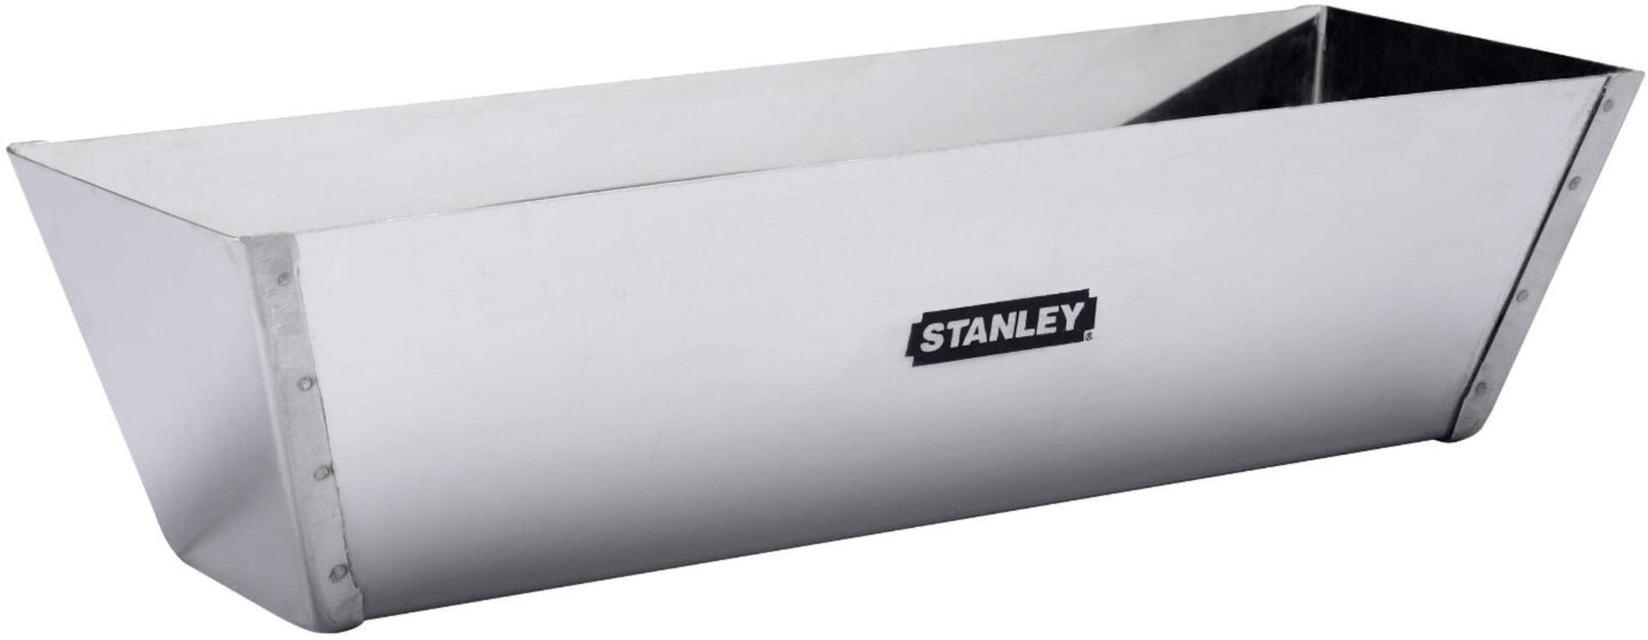 Selected image for STANLEY Posuda 305 mm - STHT0-05867